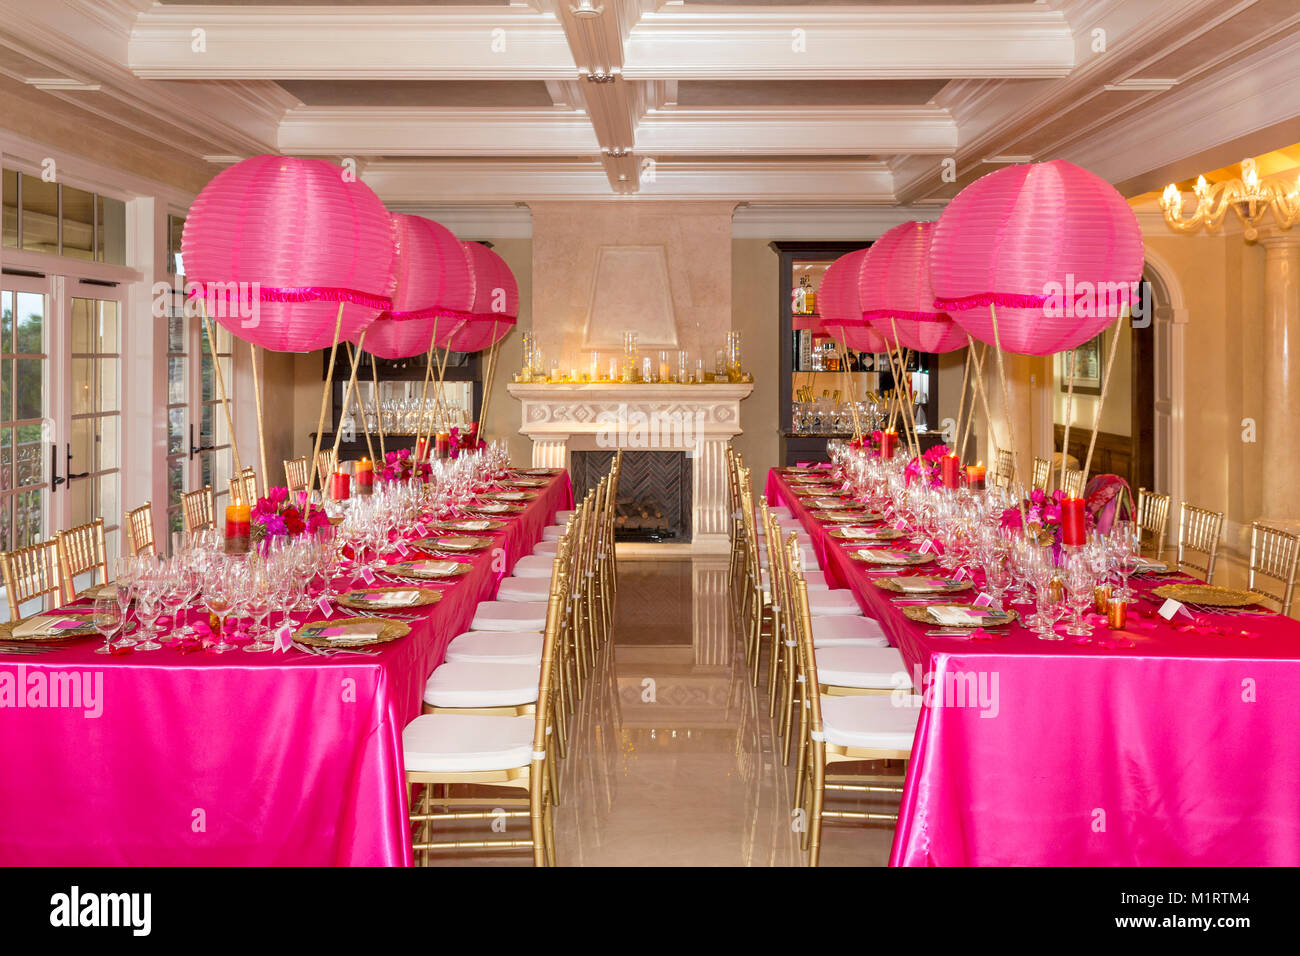 Bright pink balloon-themed party decor for a Winter Wine Festival party, Naples, Florida, USA Stock Photo